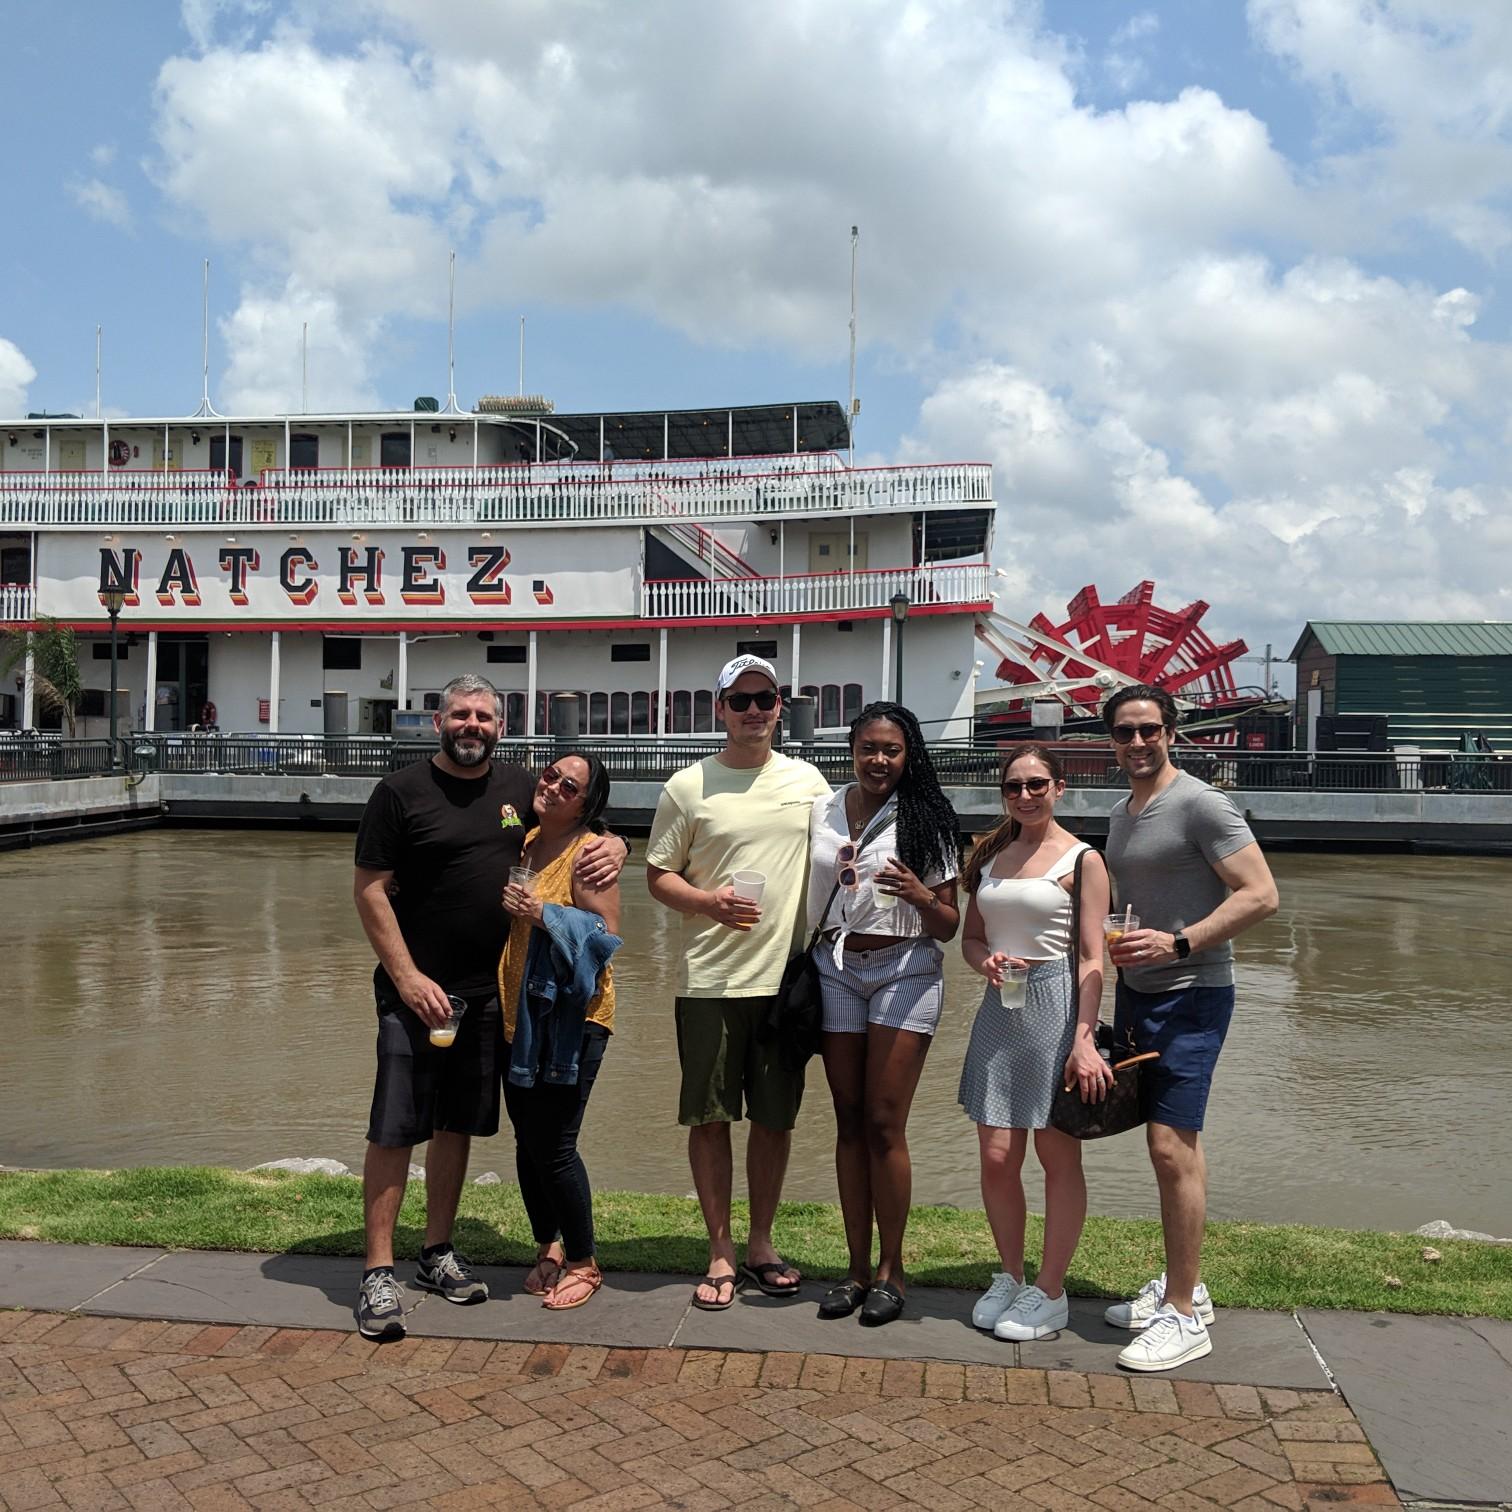 New Orleans w/ Friends getting ready to board the Natchez! 19'